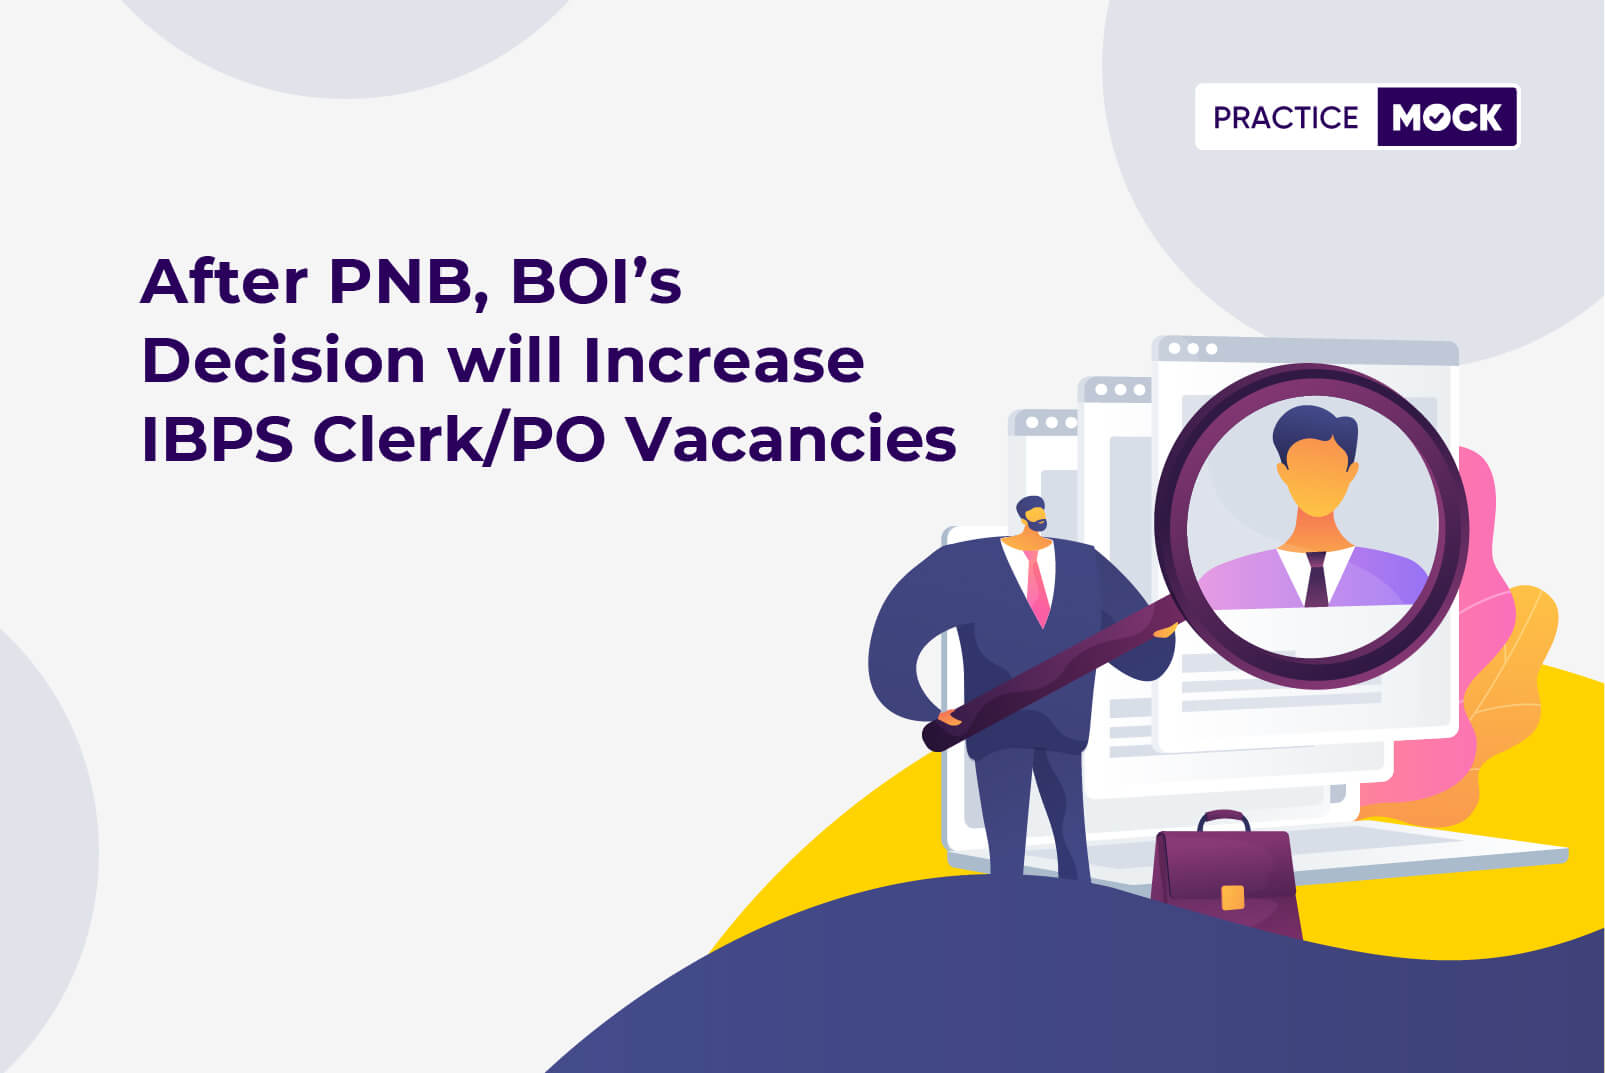 After PNB, BOI’s decision will increase IBPS Clerk:PO Vacancies